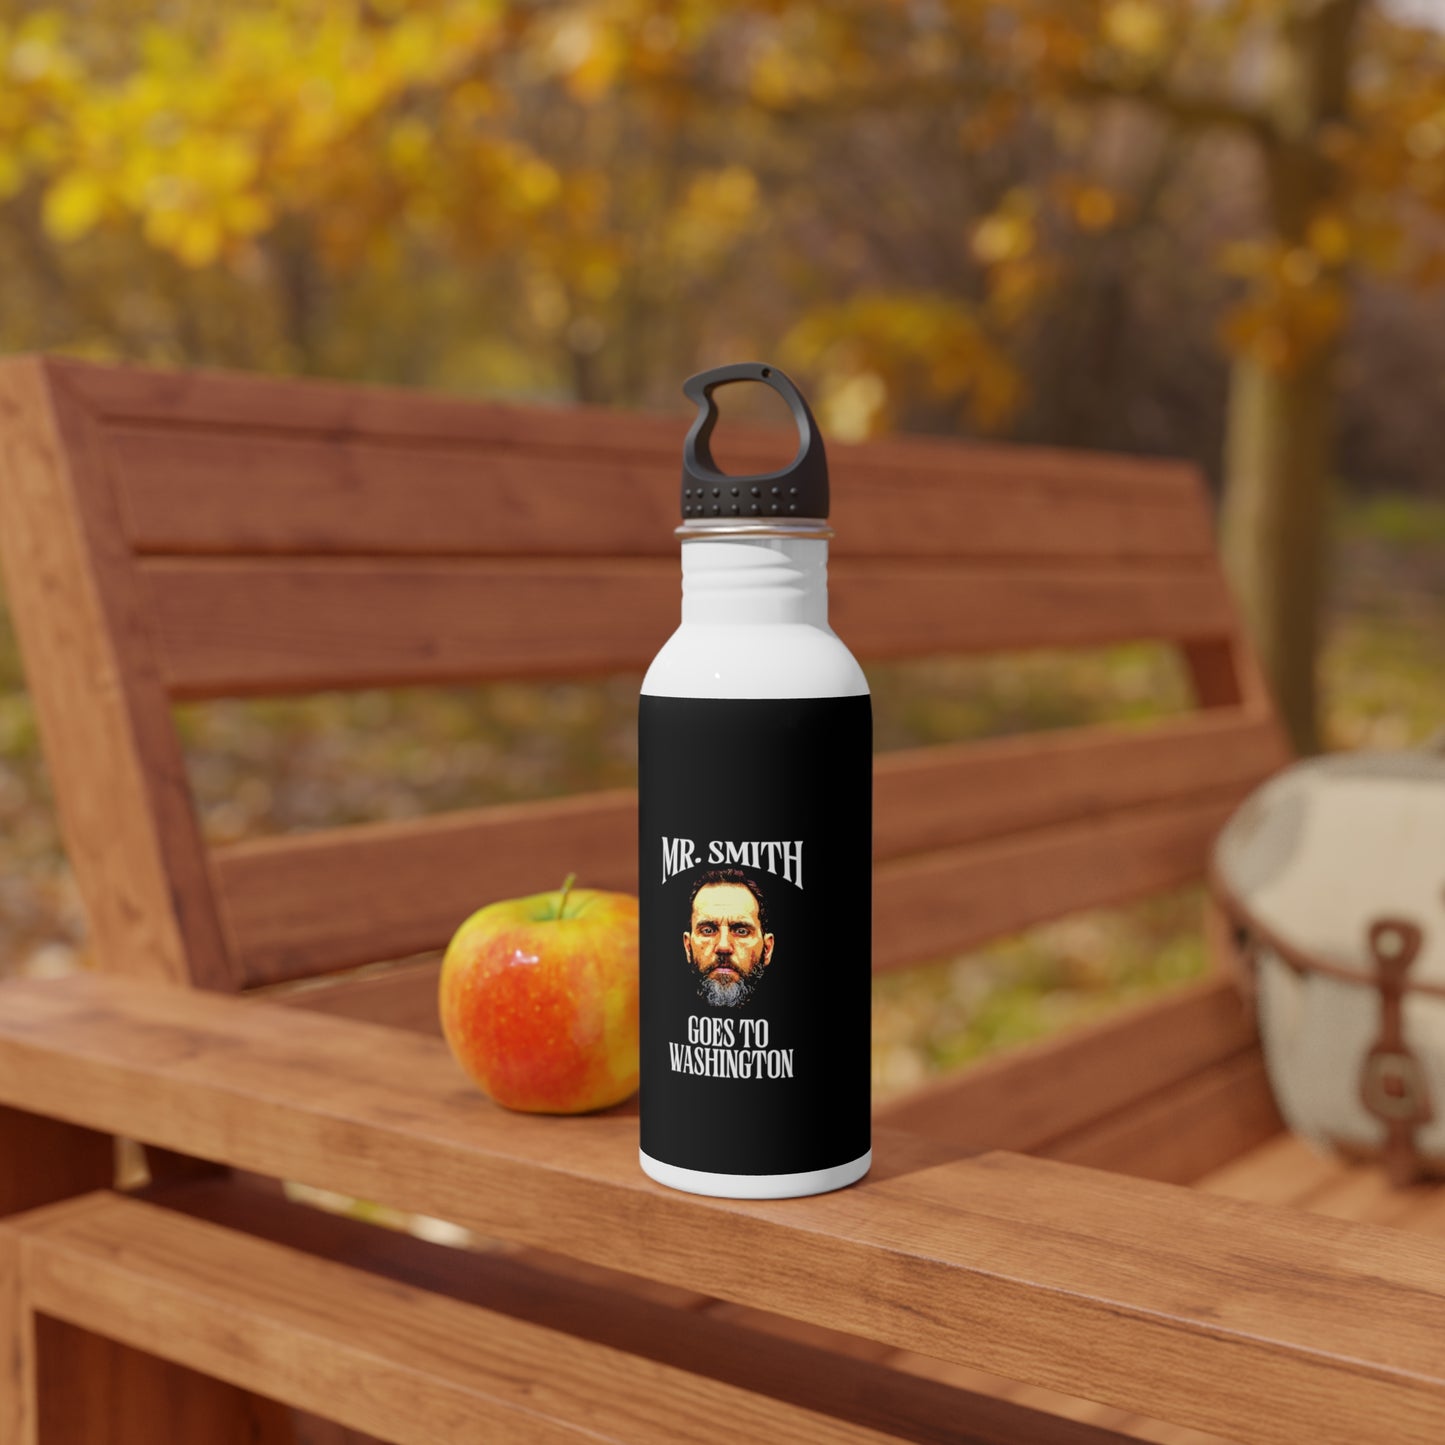 MR. SMITH GOES TO WASHINGTON - Stainless Steel Water Bottle